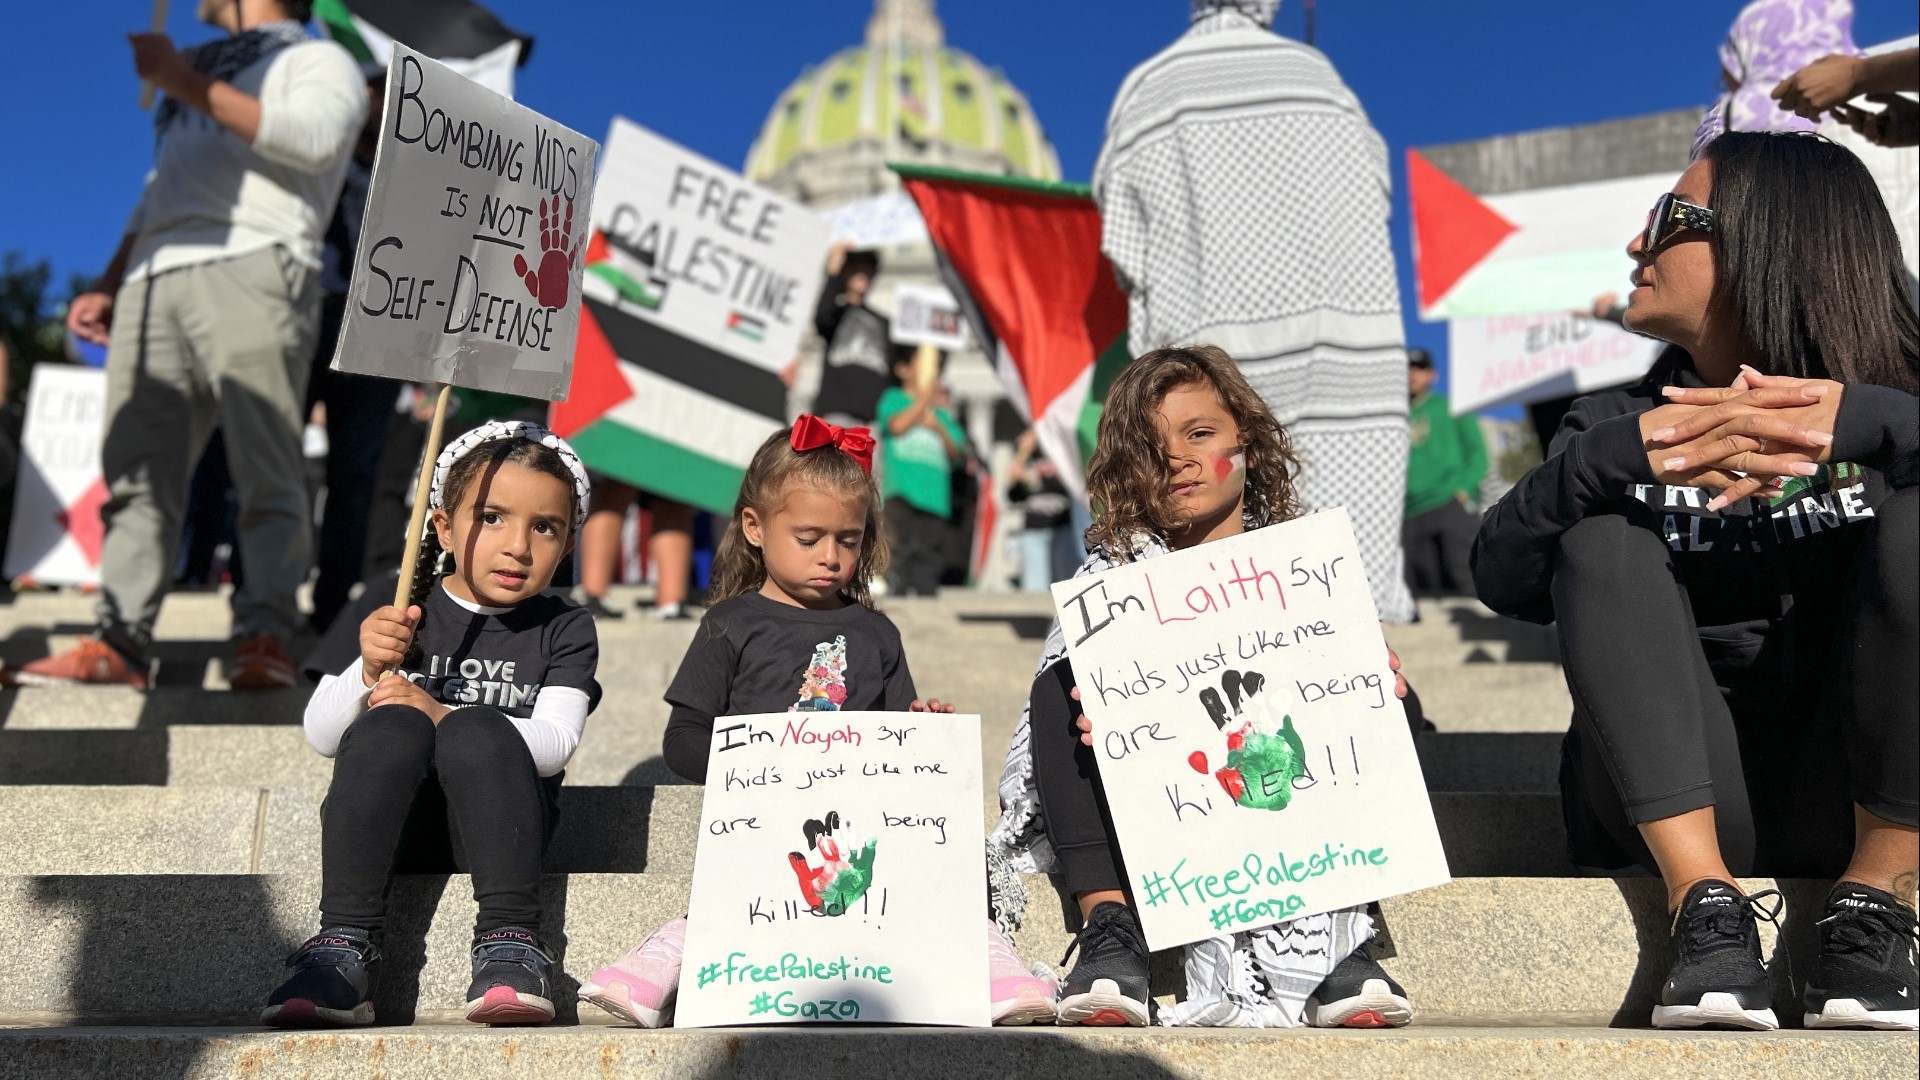 Hundreds rallied on the steps of the state Capitol, demanding an end to Isreal's occupation and violence in Palestine